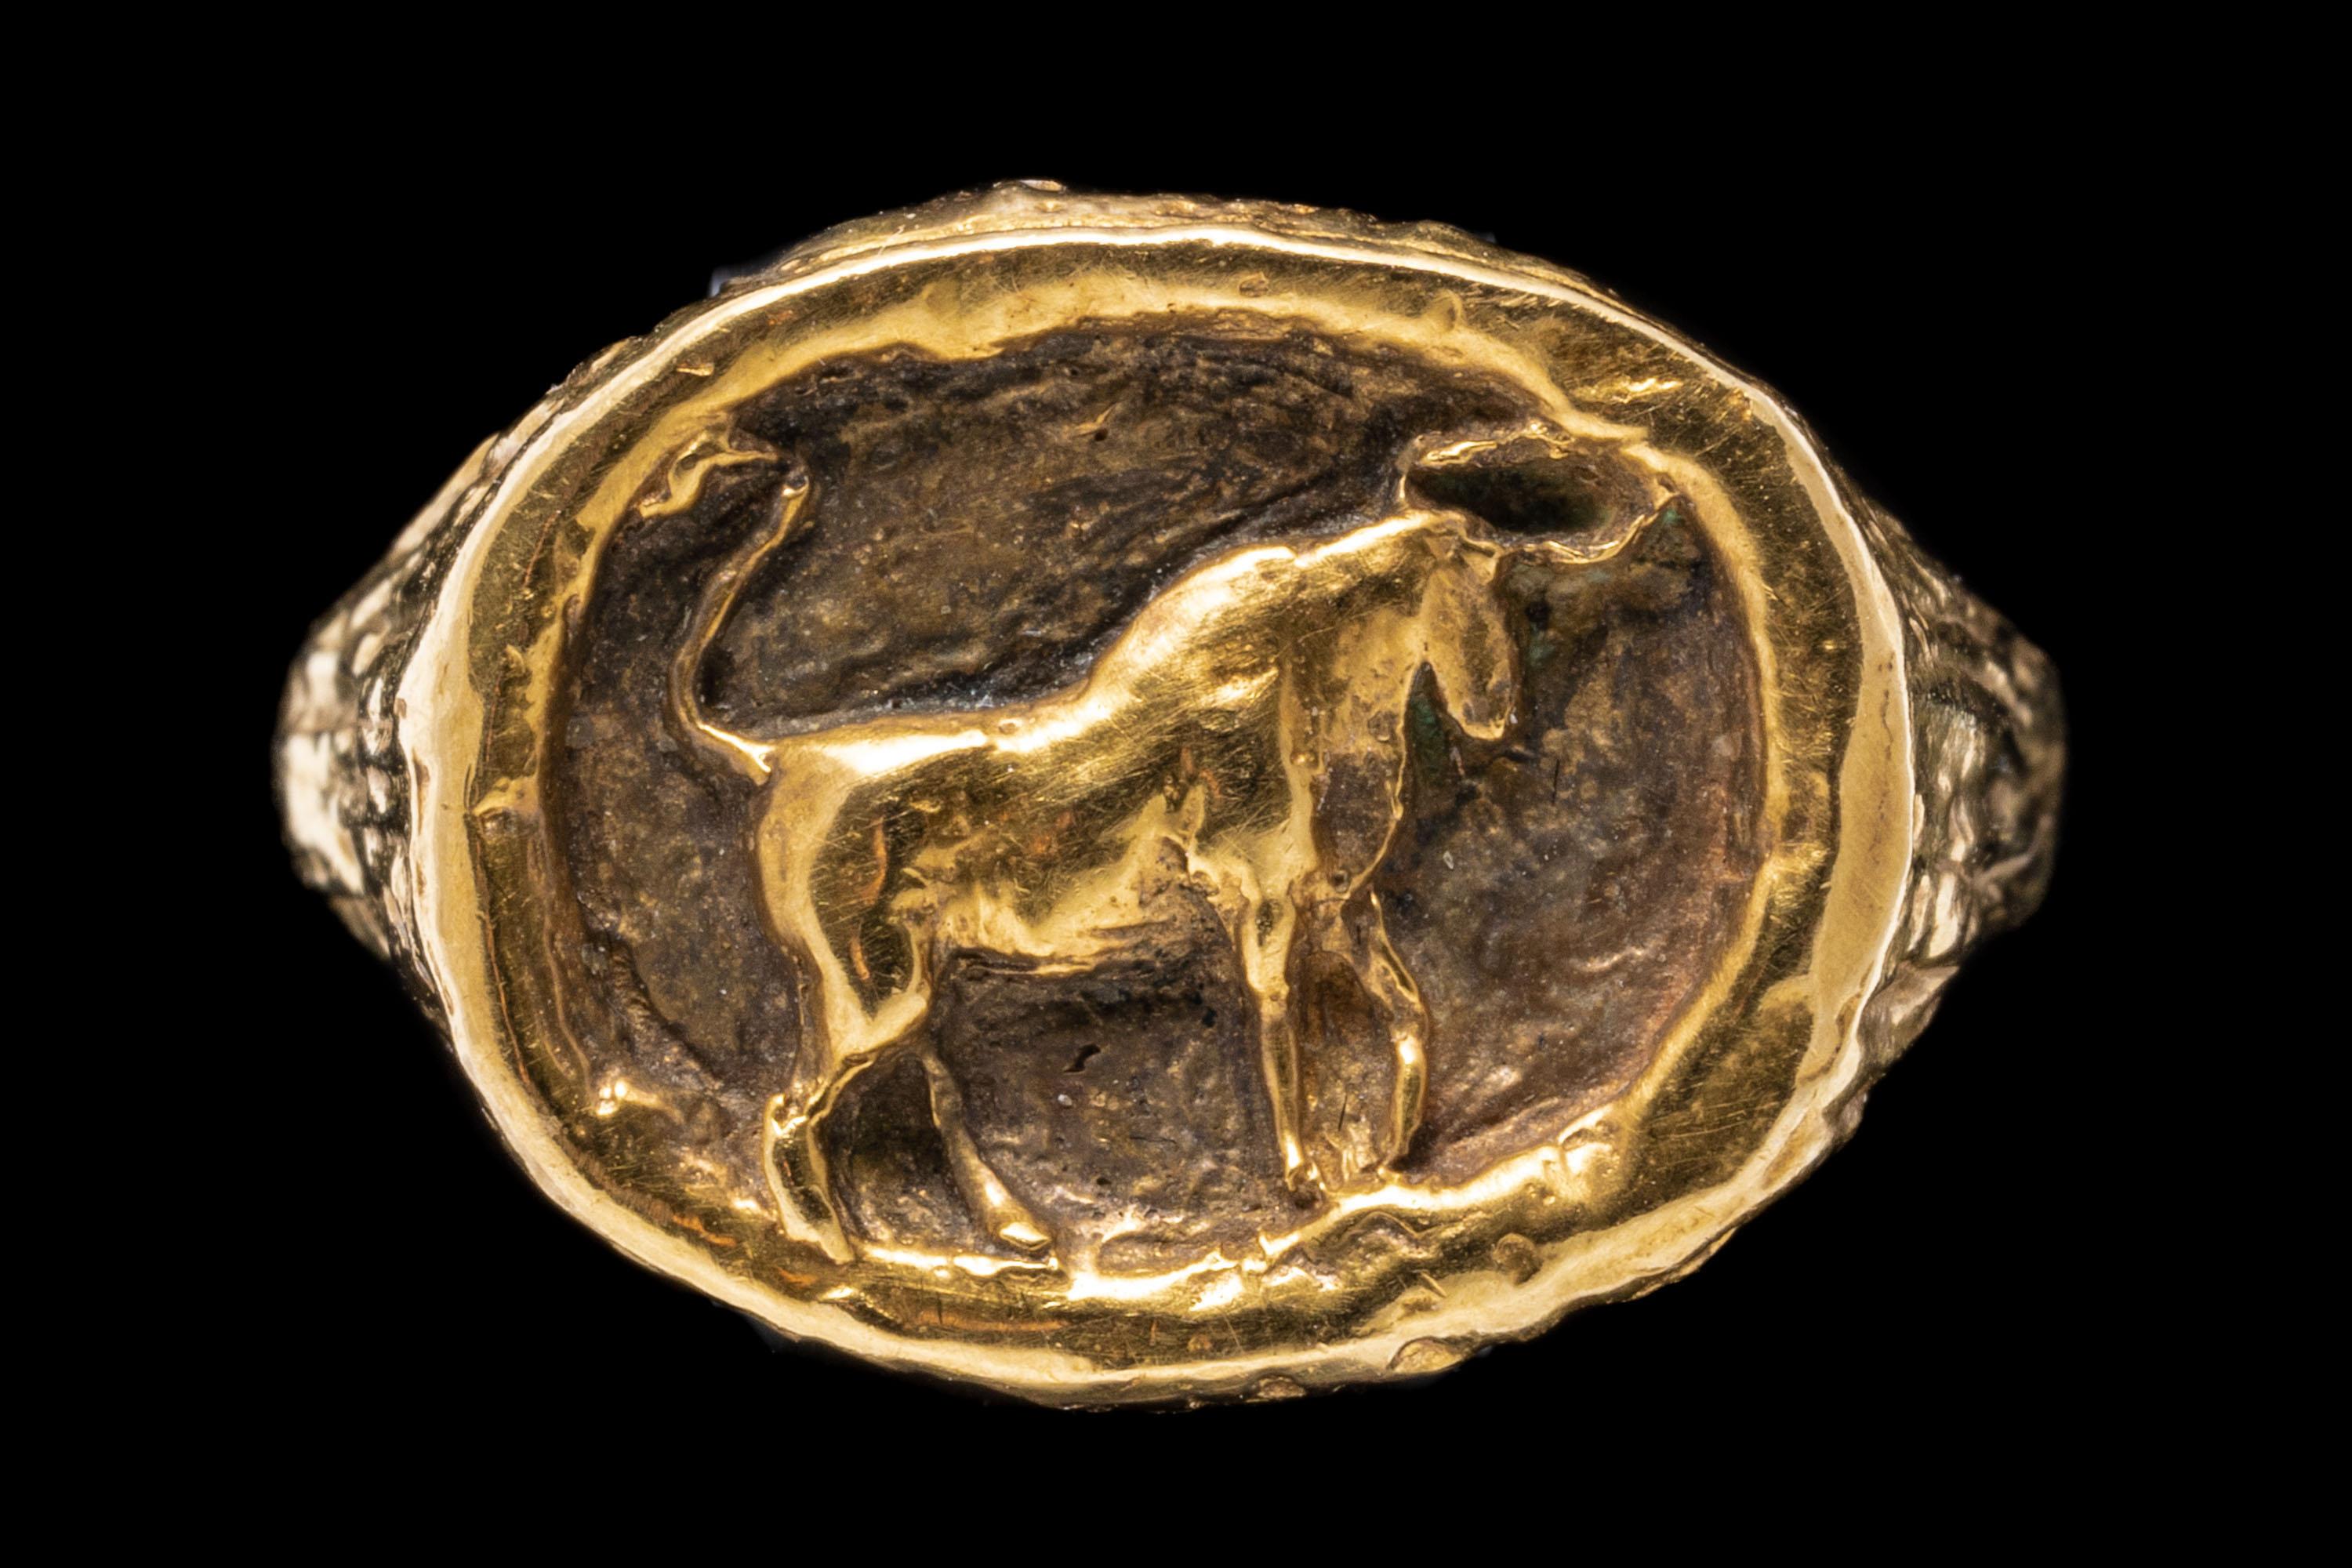 14k yellow gold ring. This unusual yellow gold ring has a blackened horizontal oval center, decorated with a high polished Taurus bull motif, edged with a wood grain style gallery.
Marks: 14k
Dimensions: 9/16